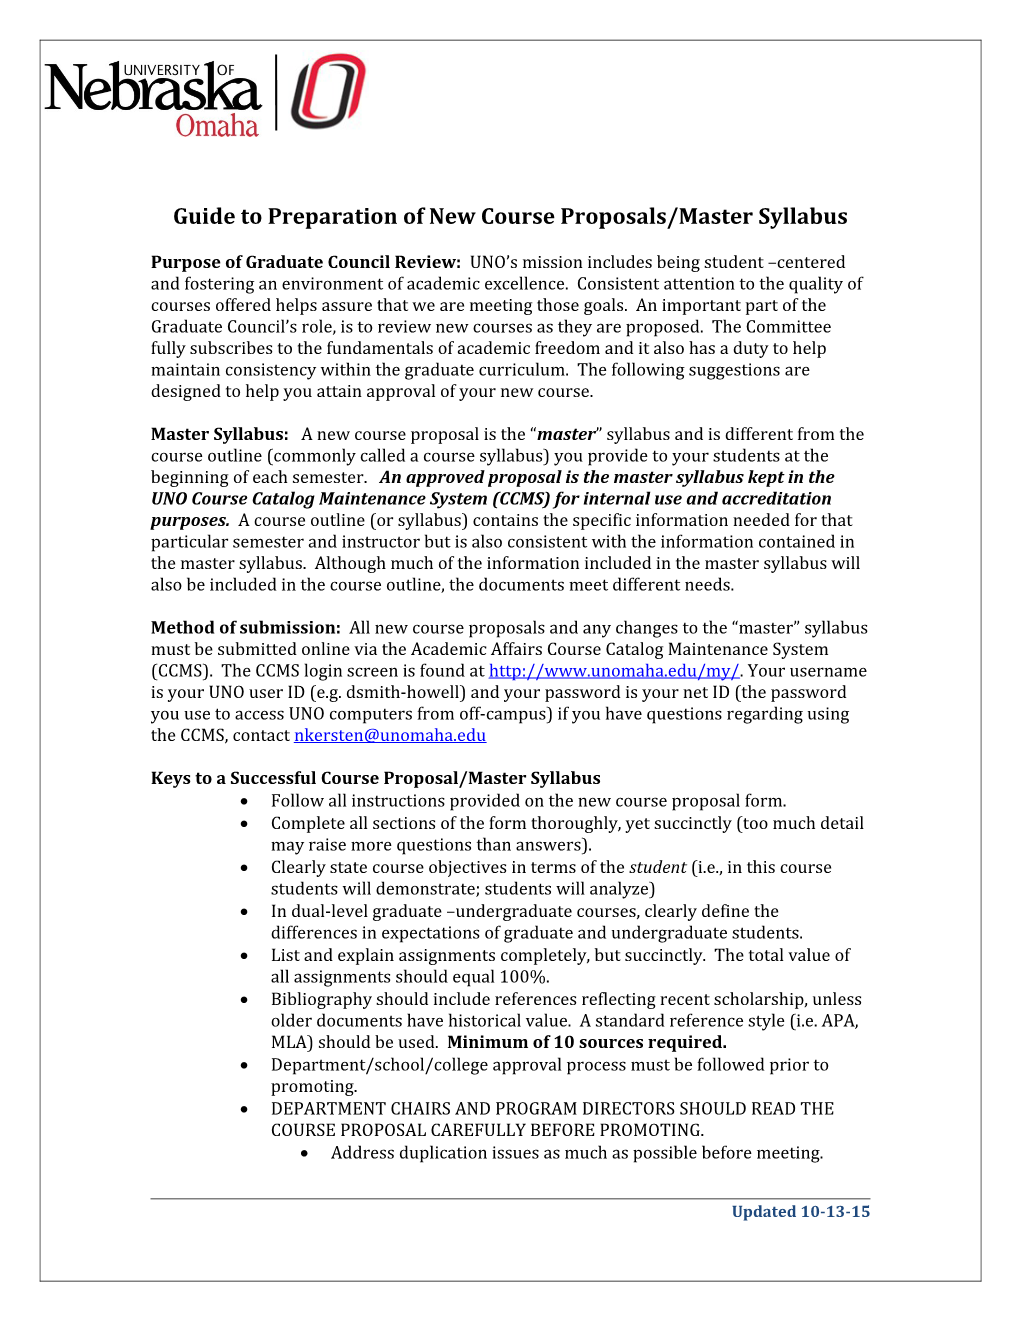 Guide to a Successful New Graduate Course Proposal